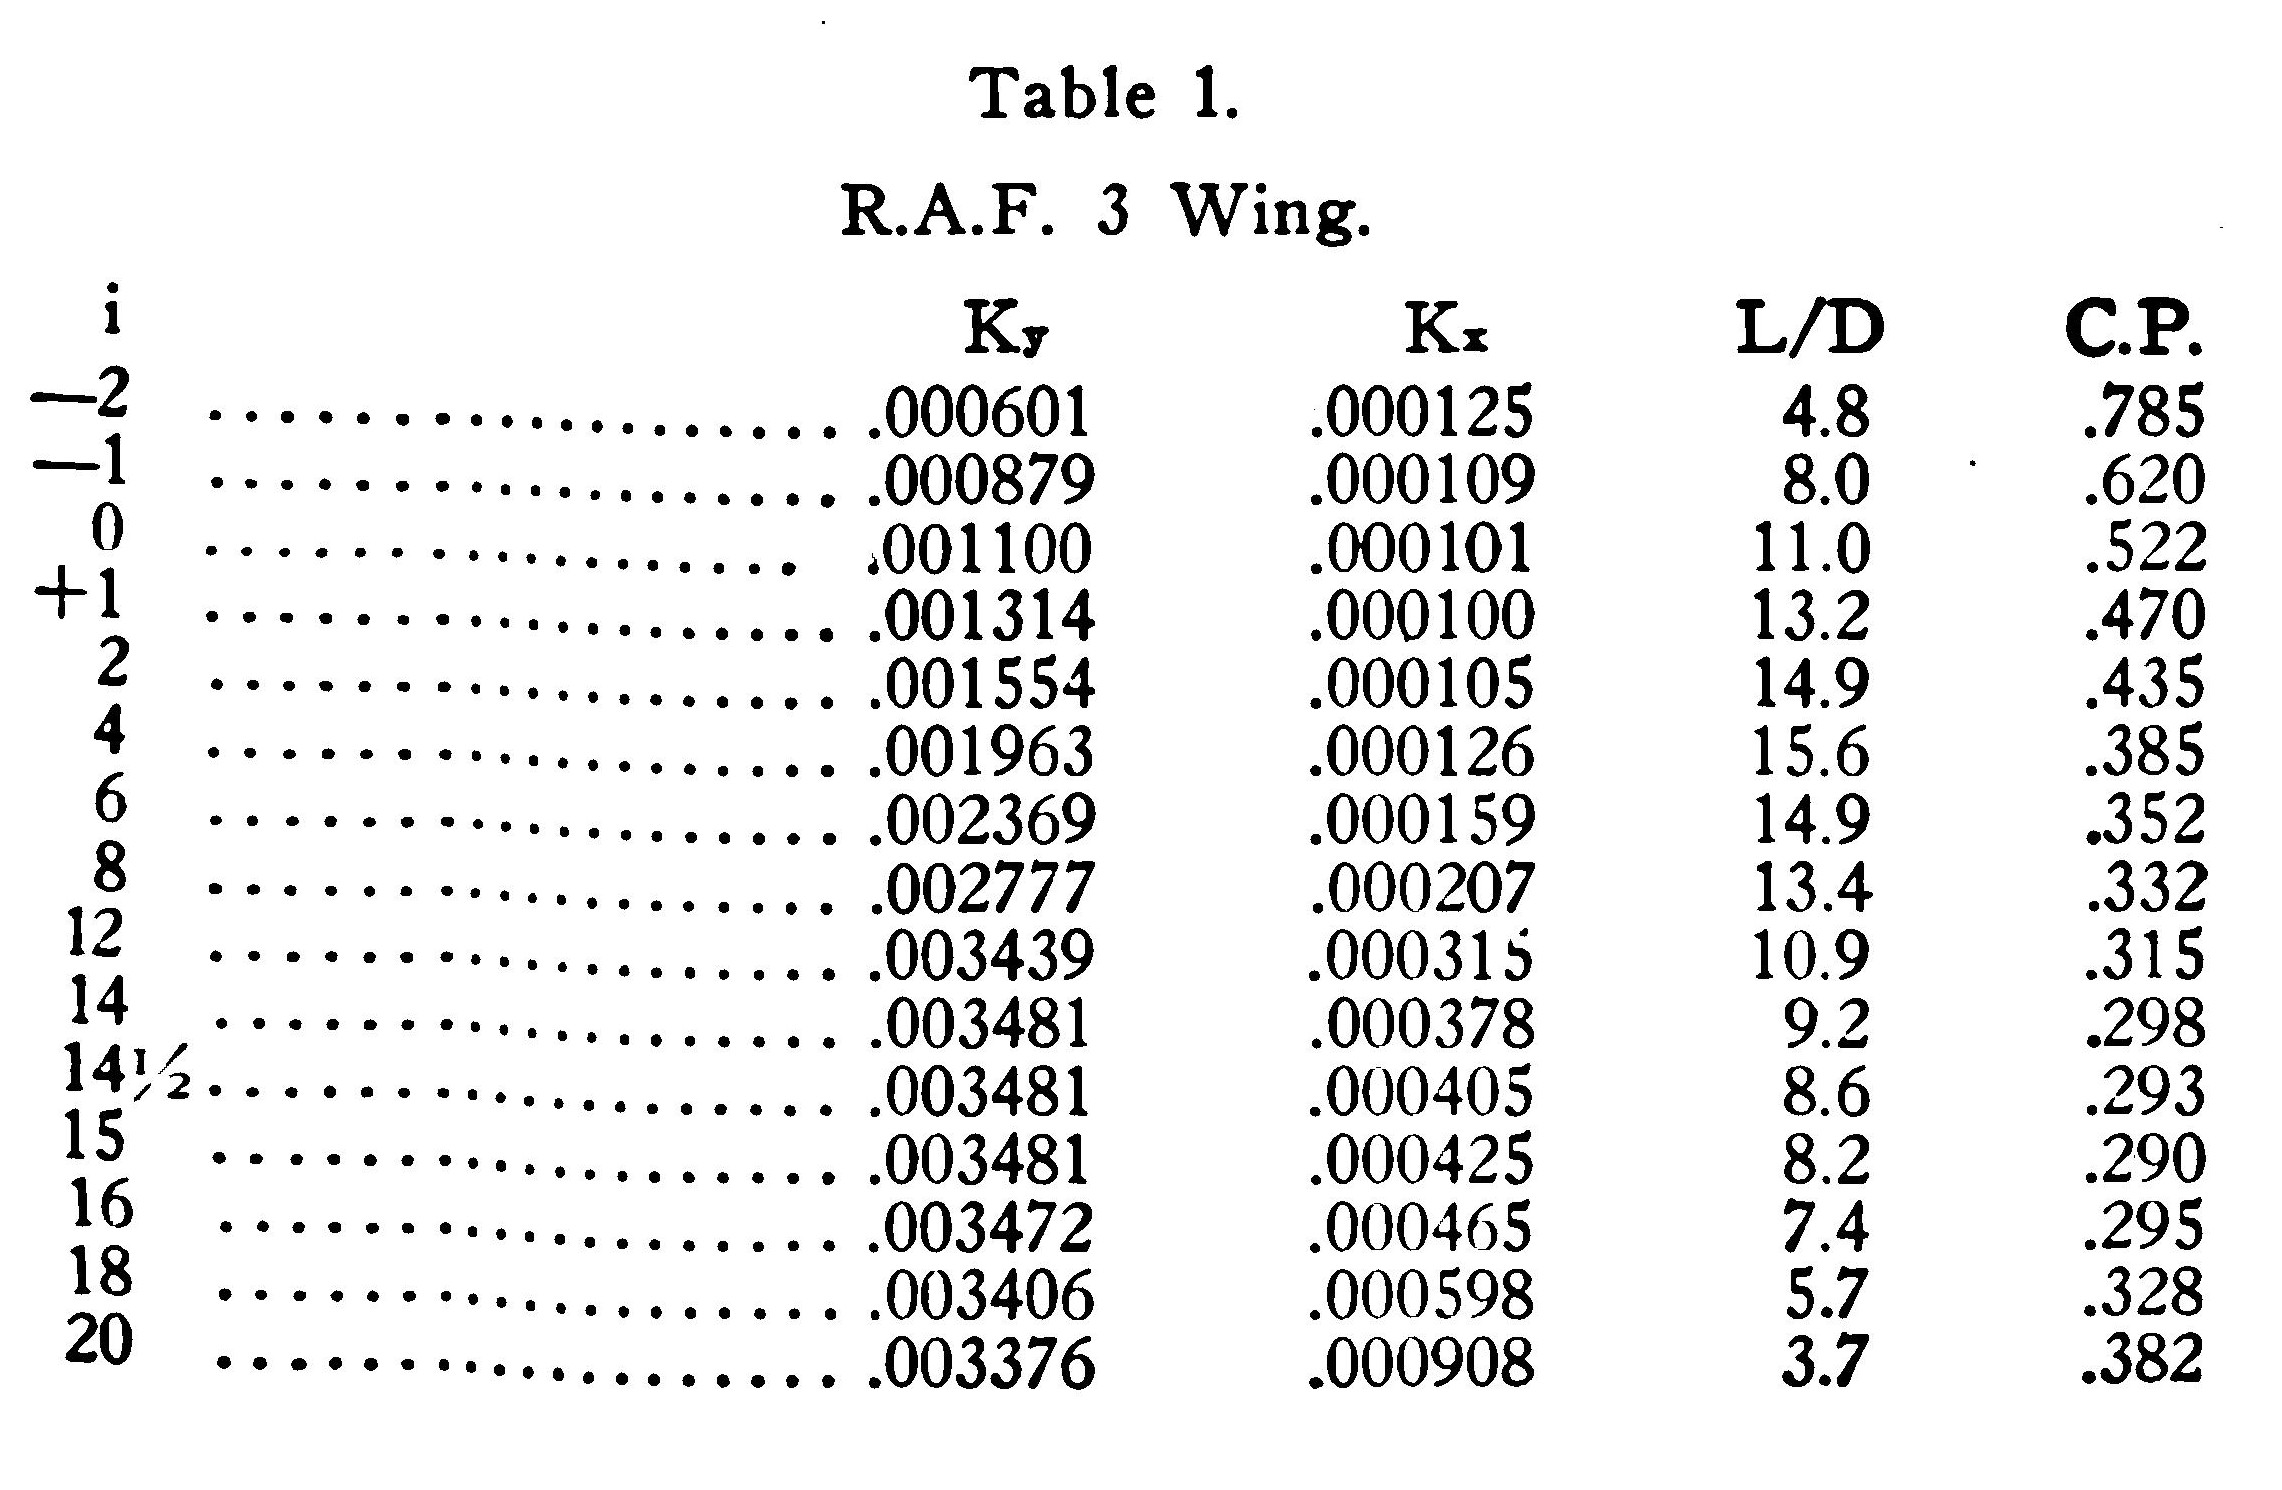 Table 1. R.A.F. 3 Wing.